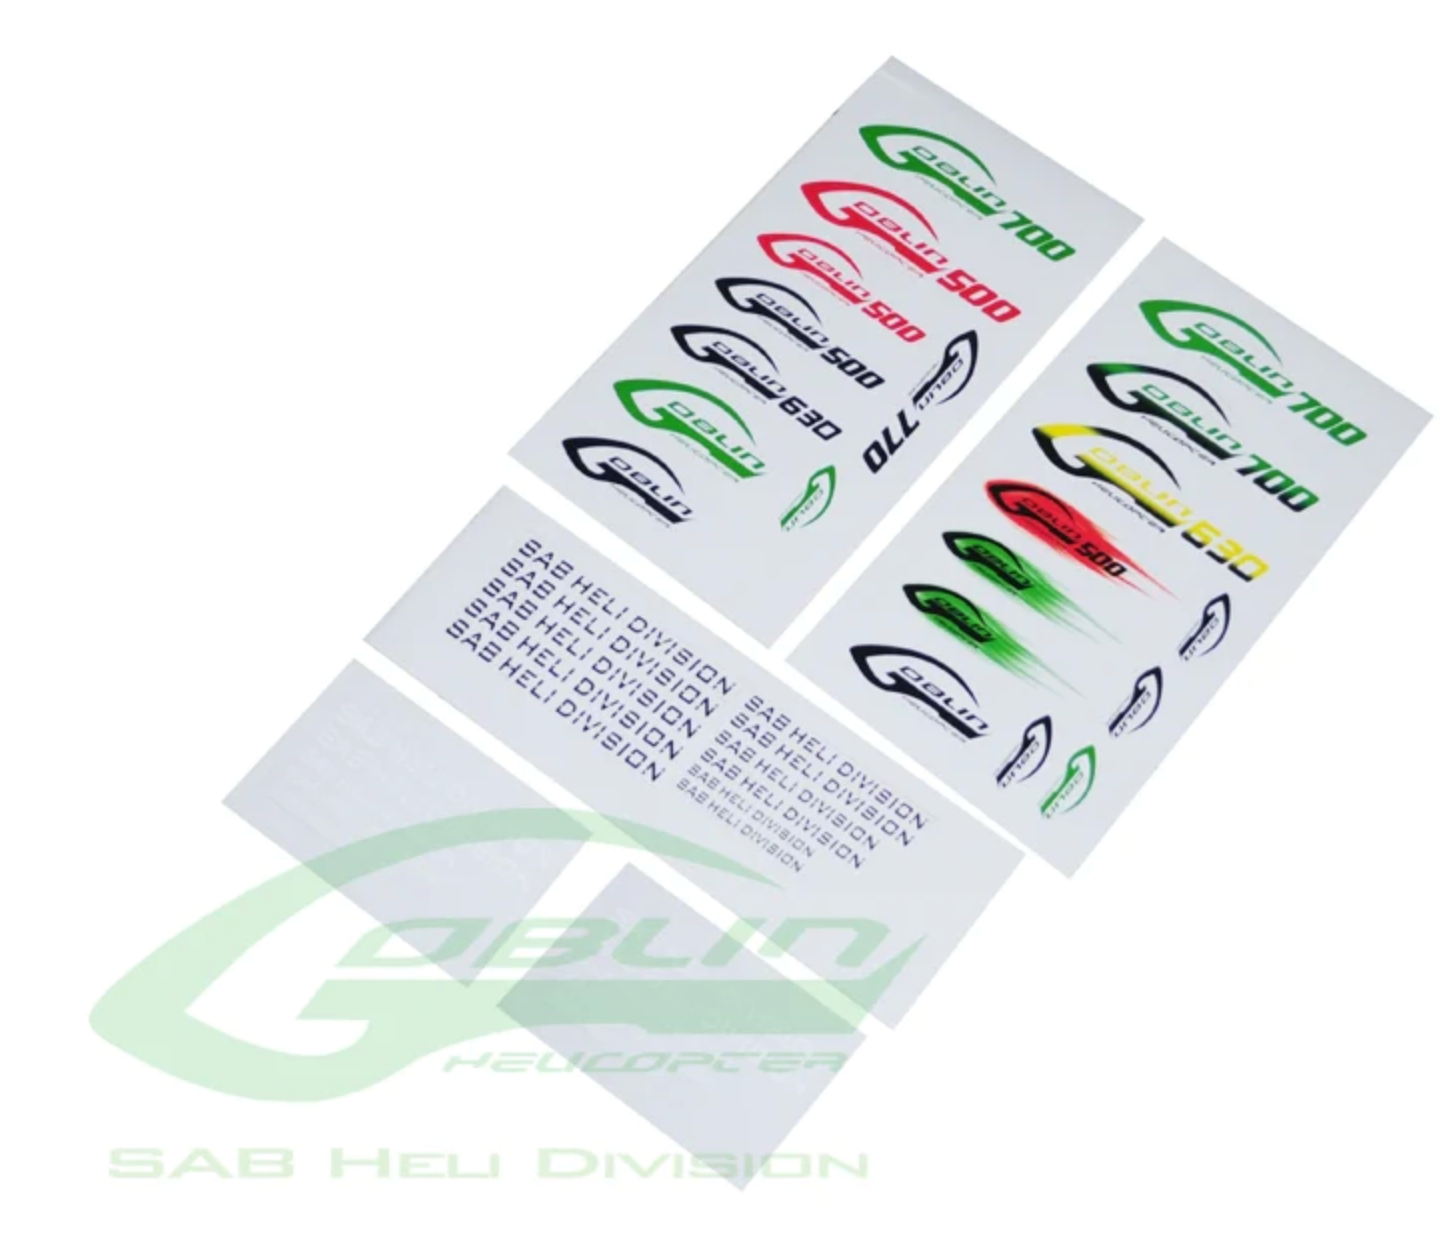 SAB HELI DIVISION STICKERS